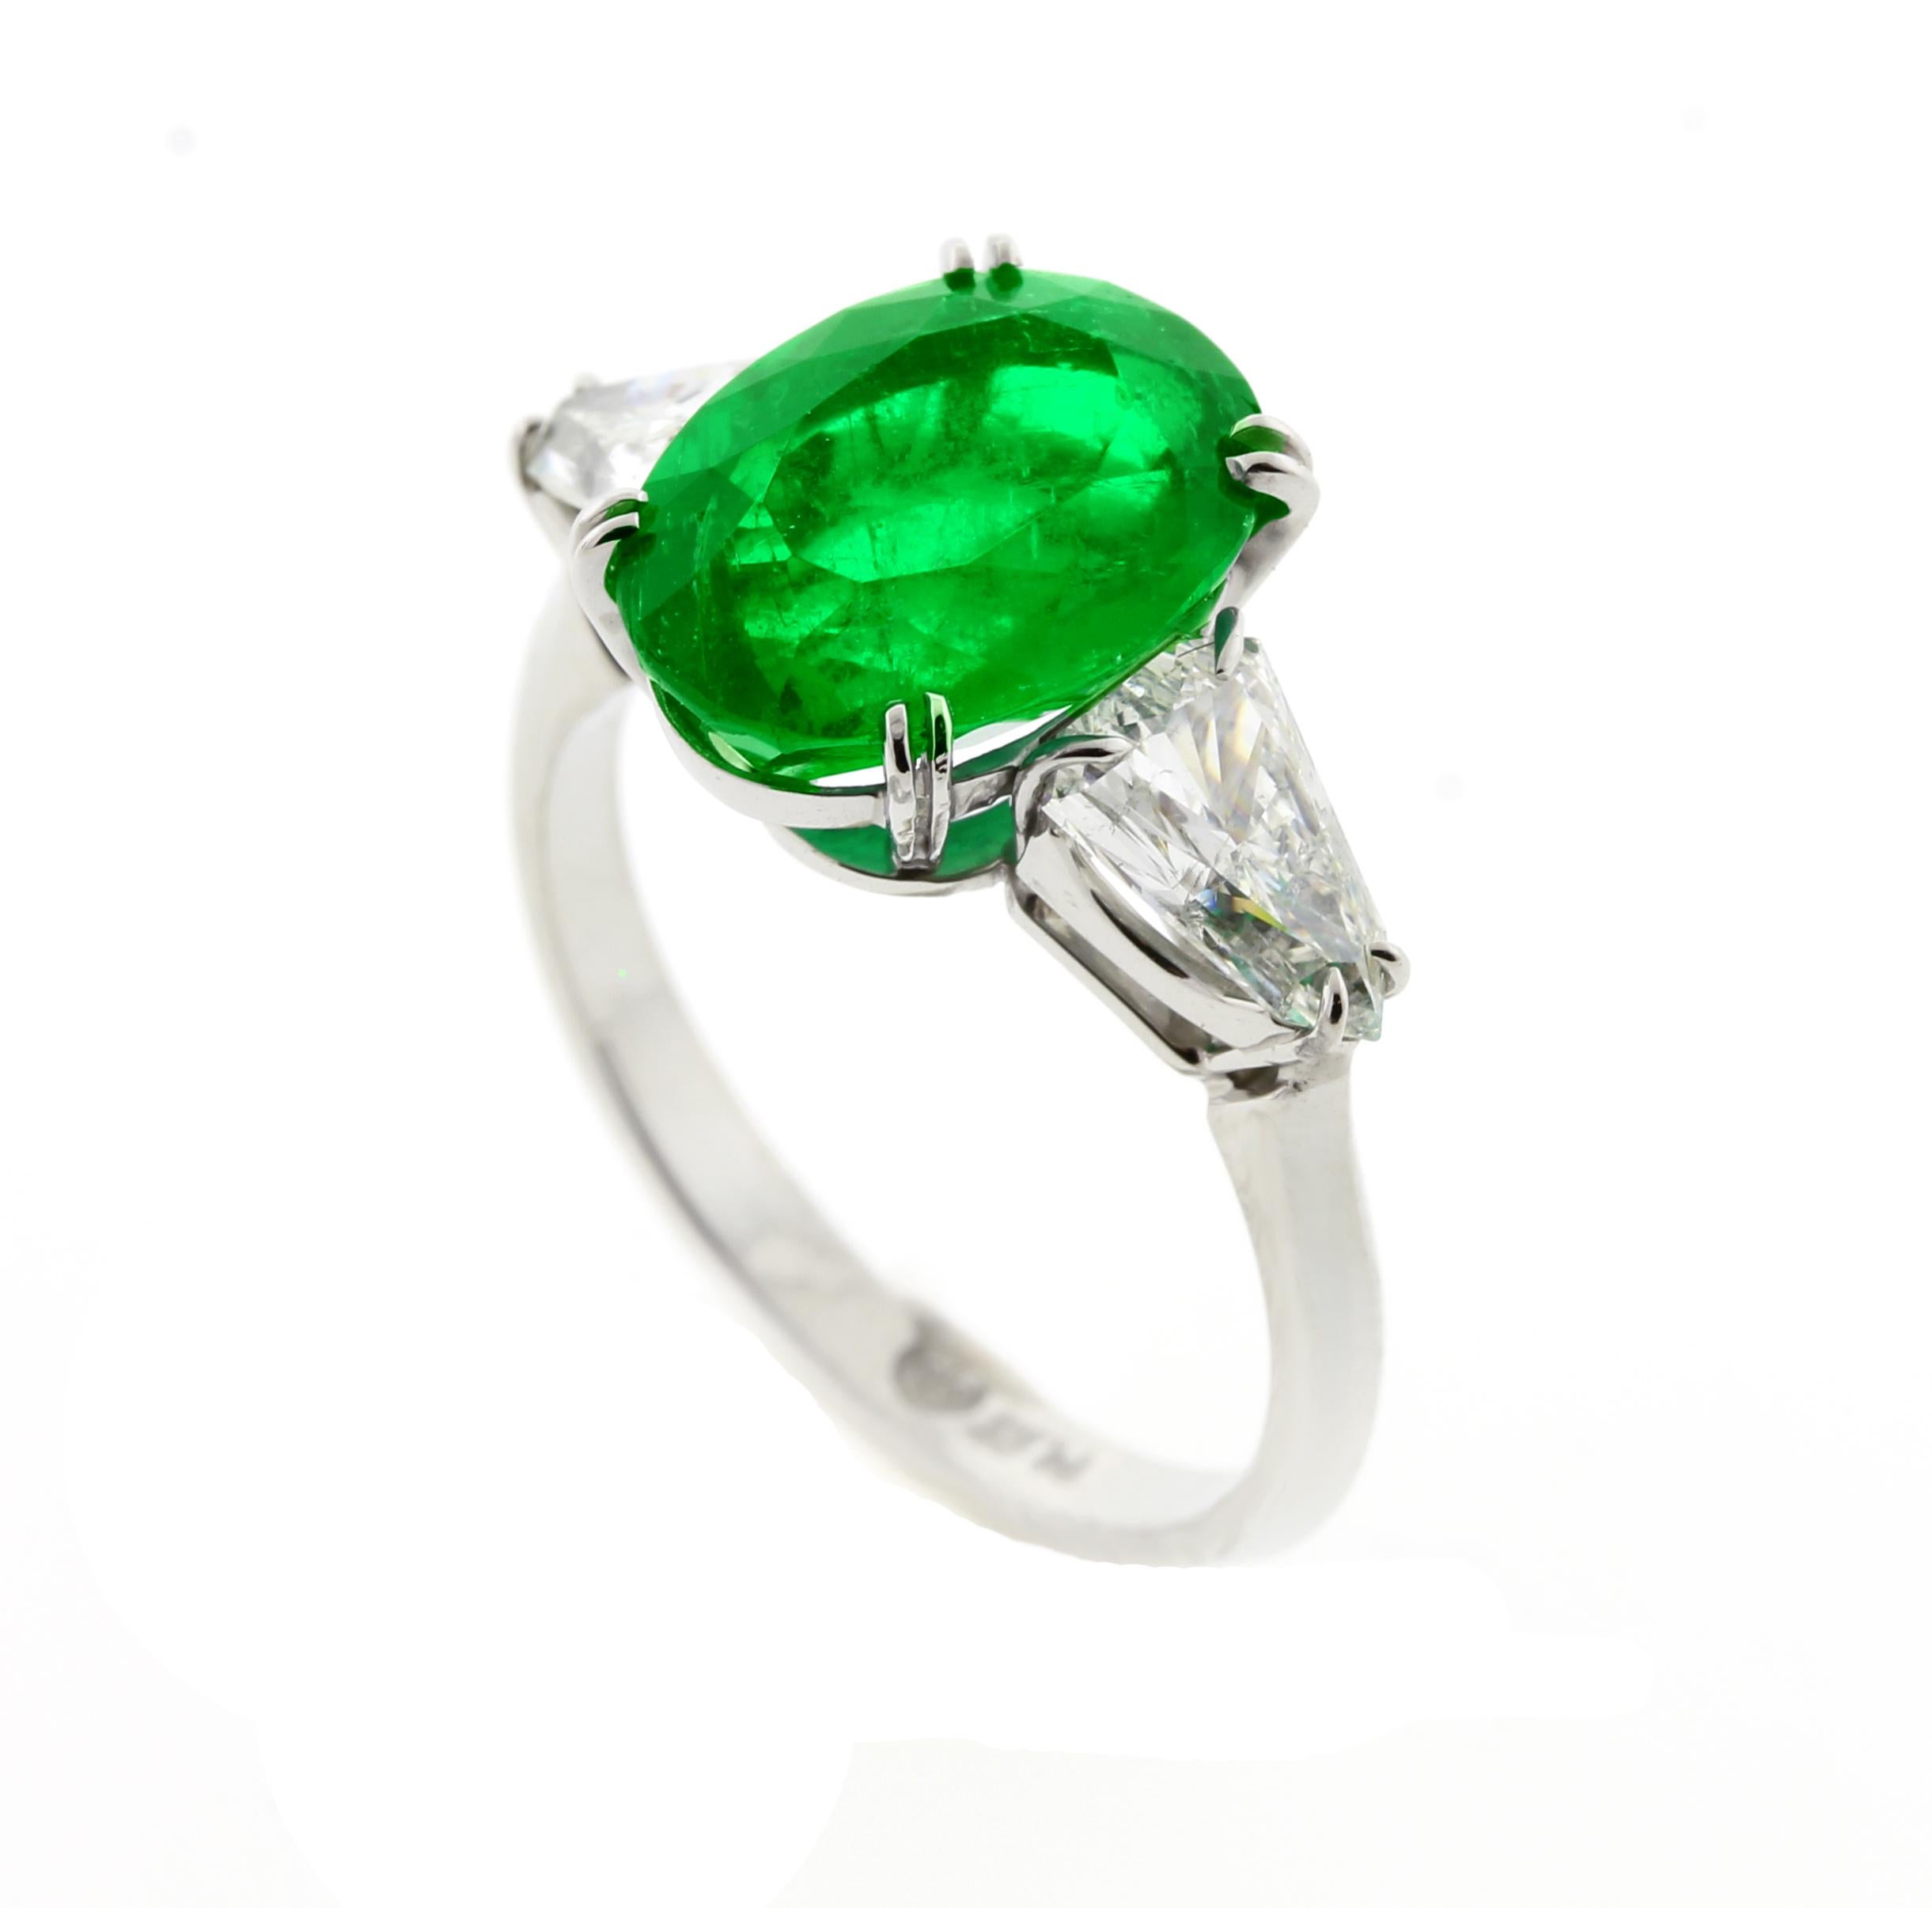 From the master ring makers of Pampillonia jewelers this certified oval emerald and shield cut  handmade diamond ring.  A.G.L has certified the emerald to be from Colombia with only minor (rare) enhancements.
♦ Designer: Pampillonia
♦ Metal: